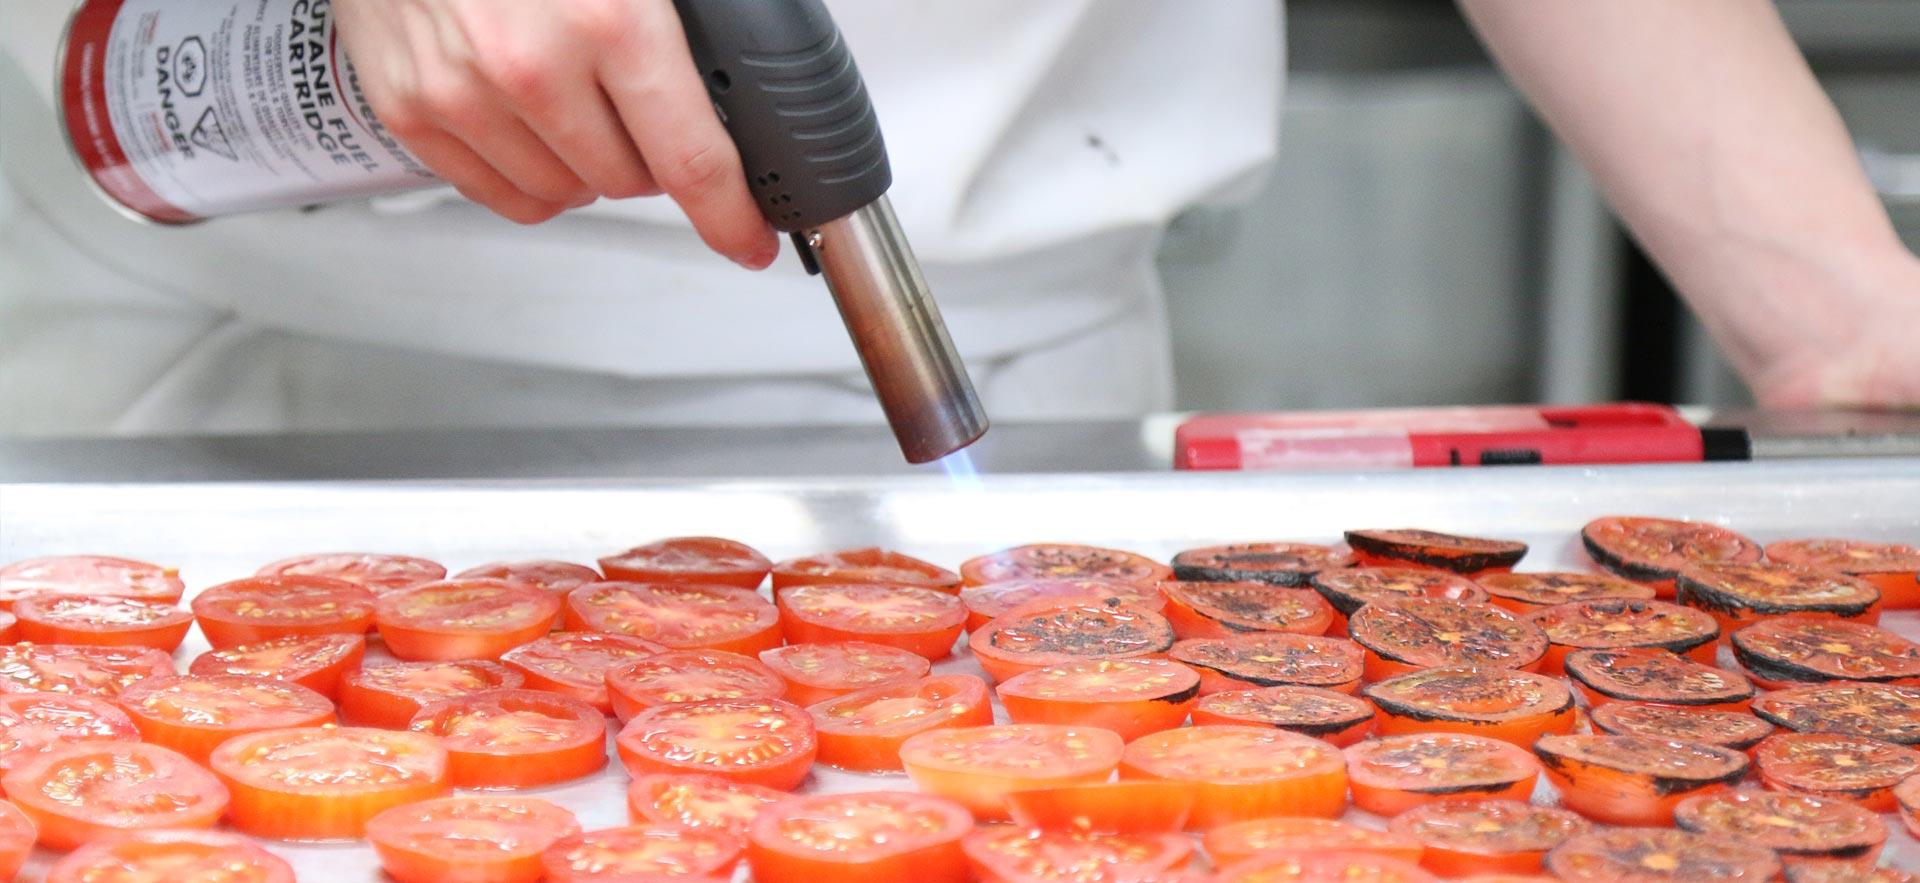 A culinary student fire roasting tomatoes in one the Sault College culinary kitchens.